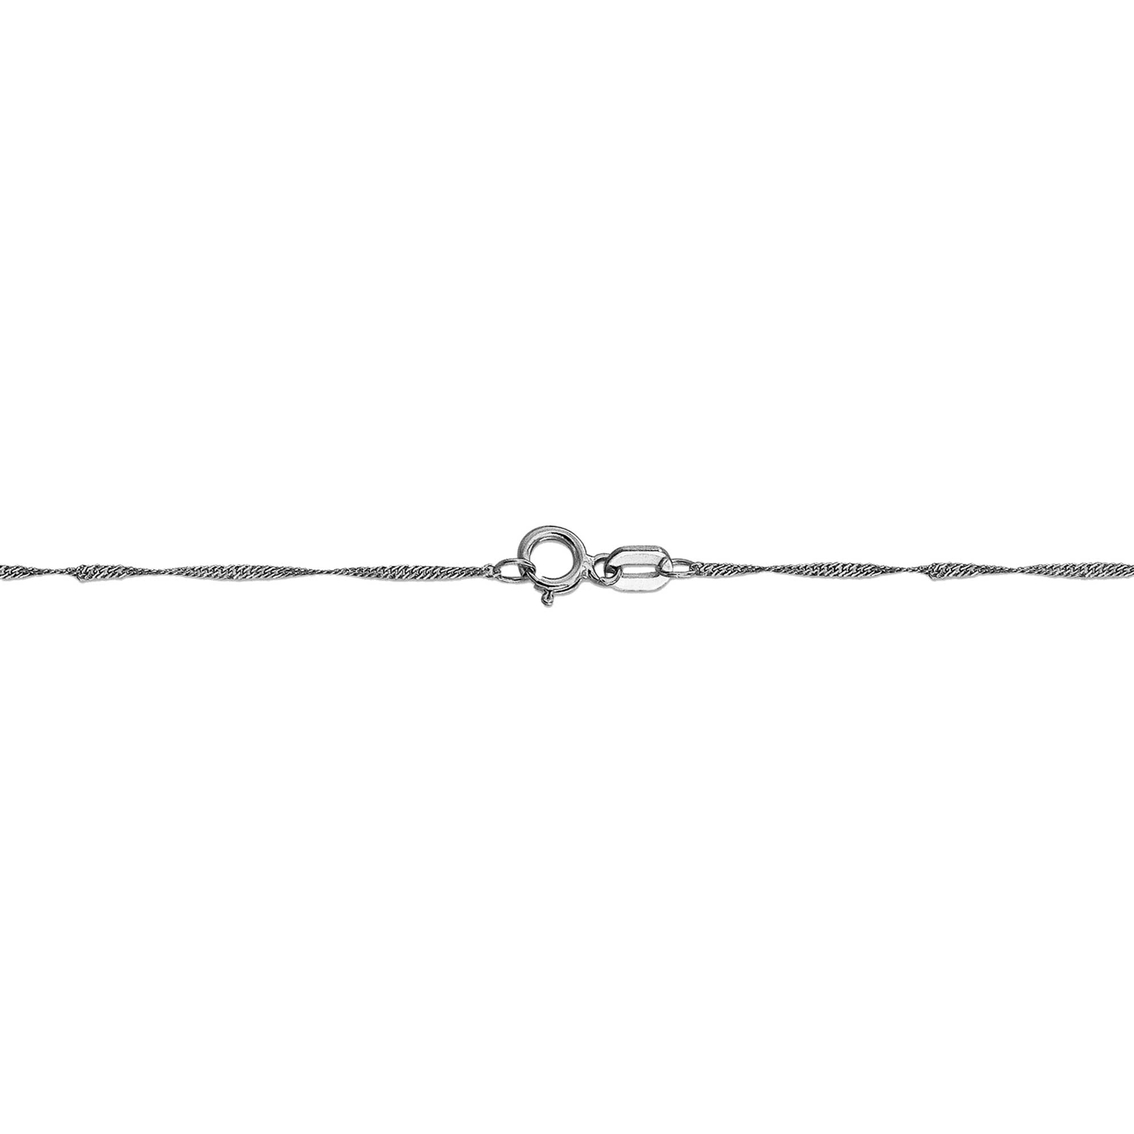 14K White Gold 1.0mm Singapore Chain Necklace - Image 2 of 3